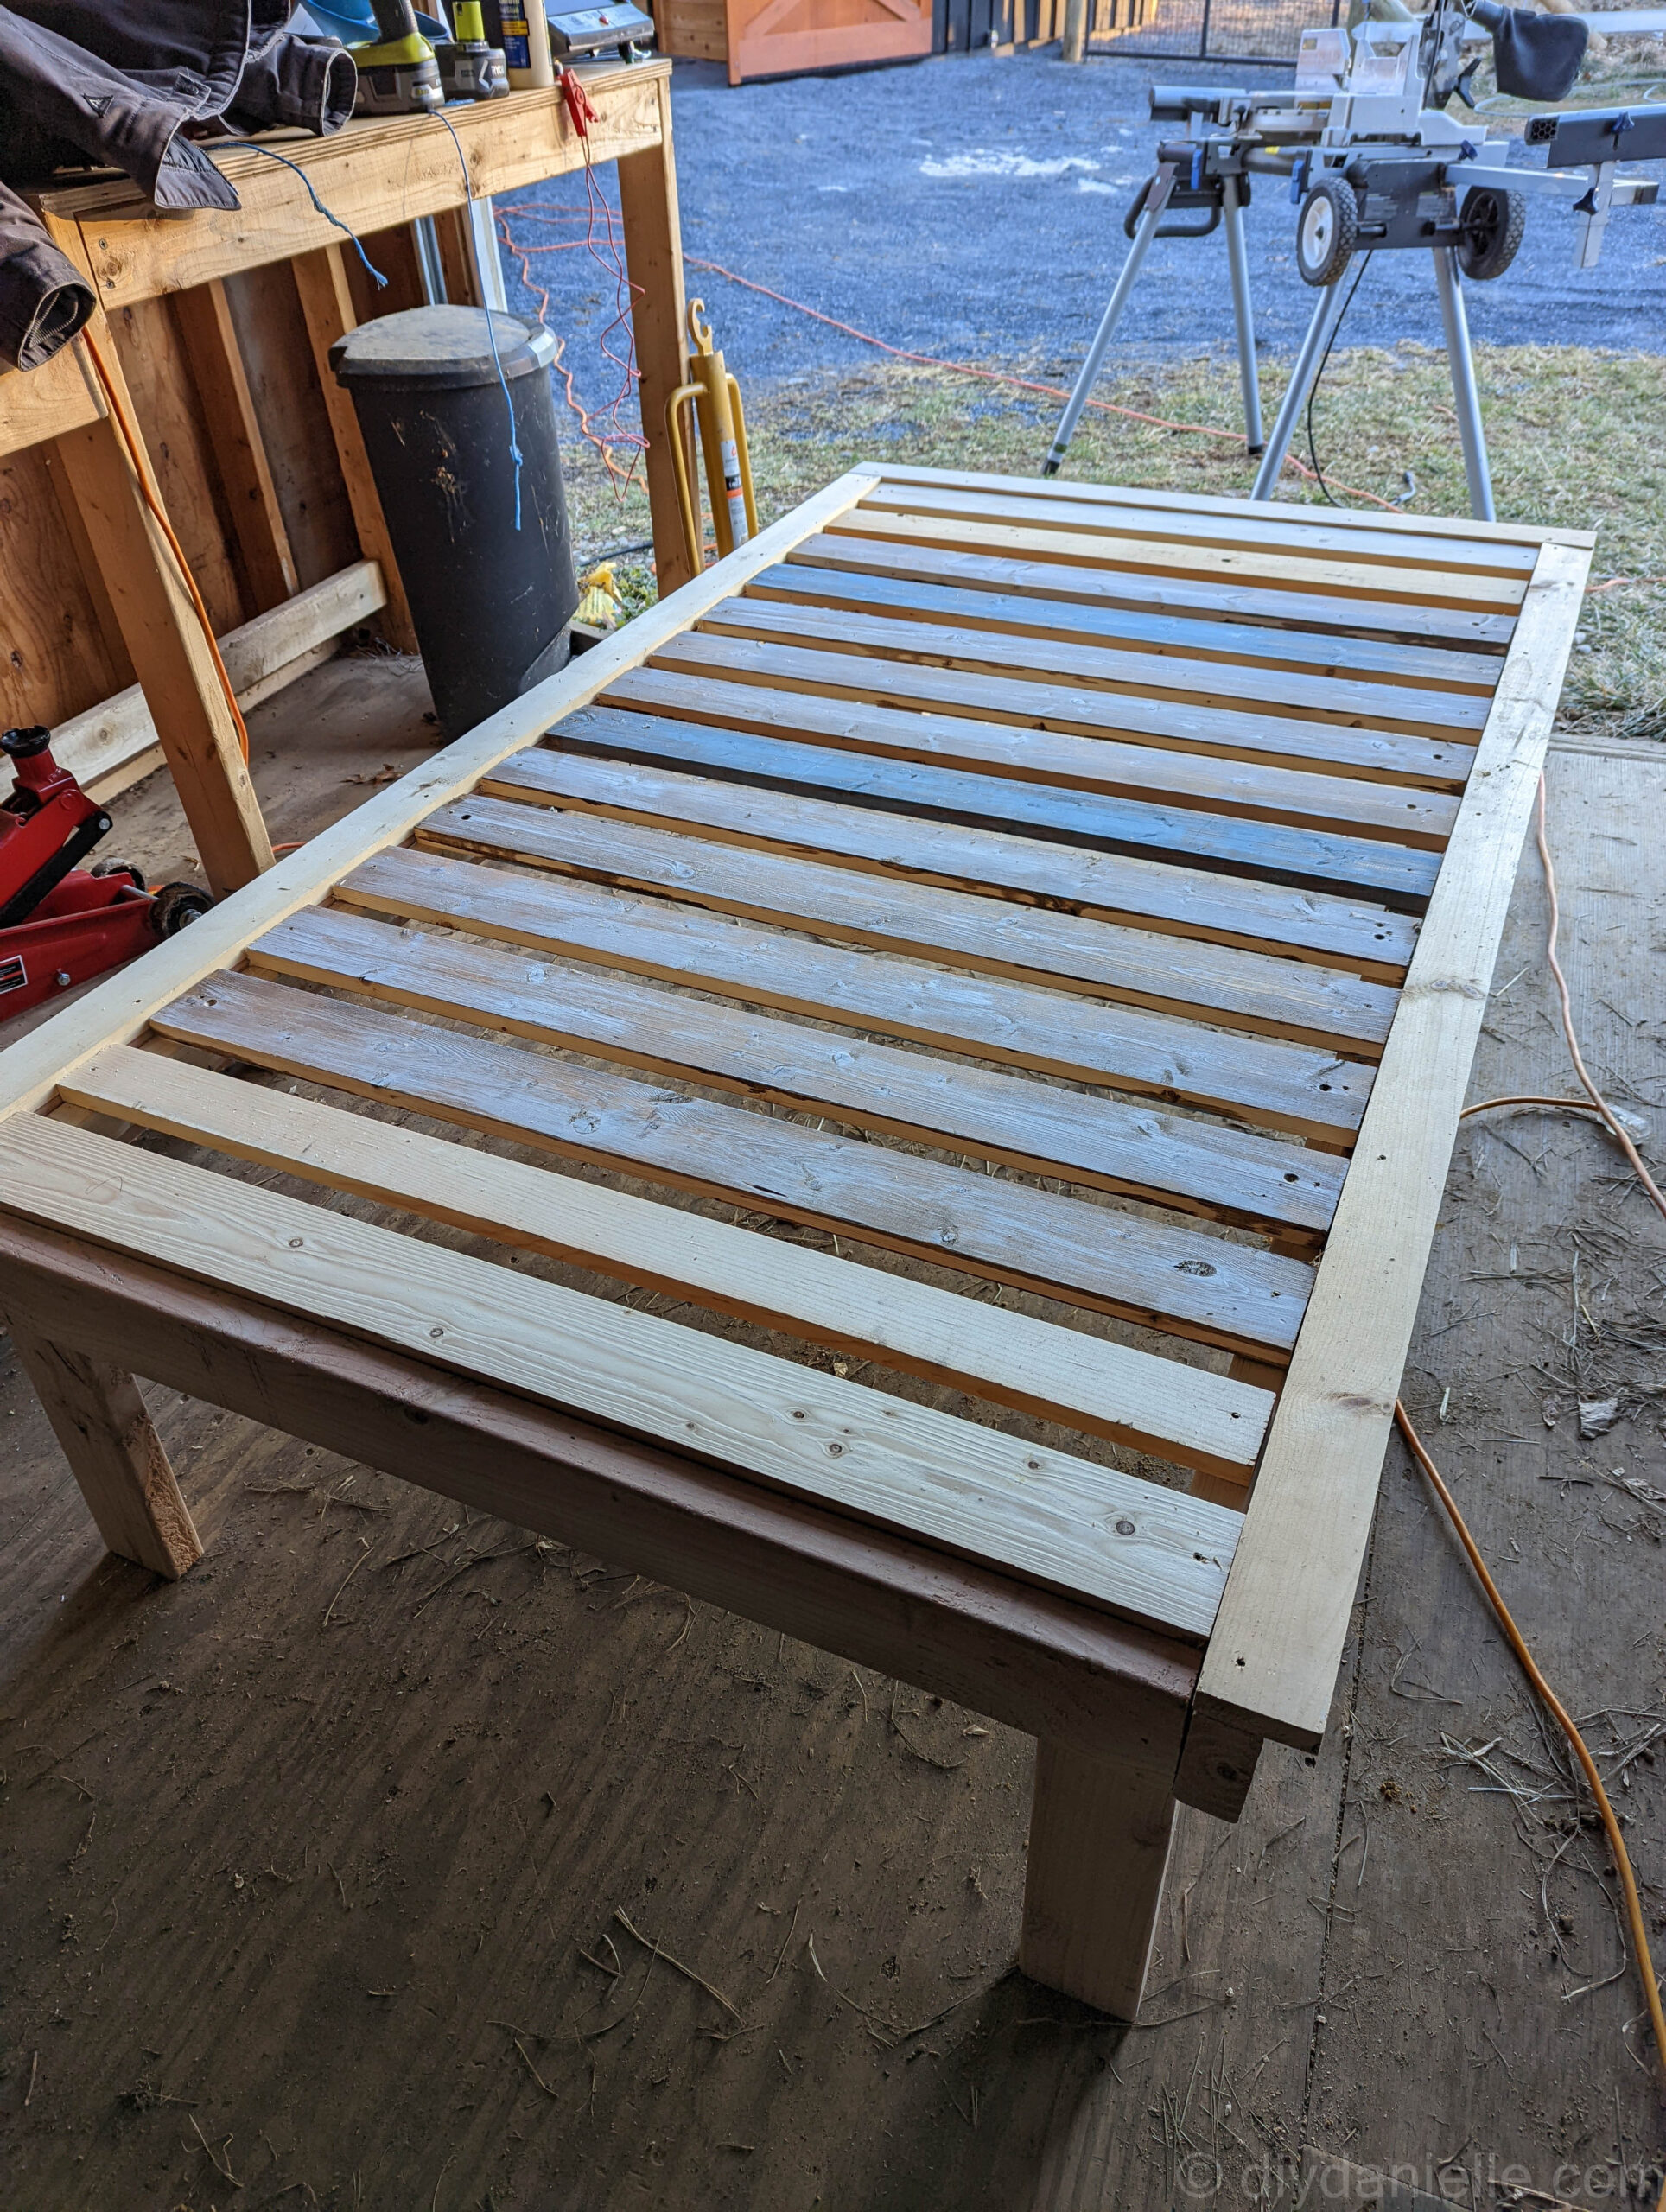 All of the slats attached to the twin platform bed.